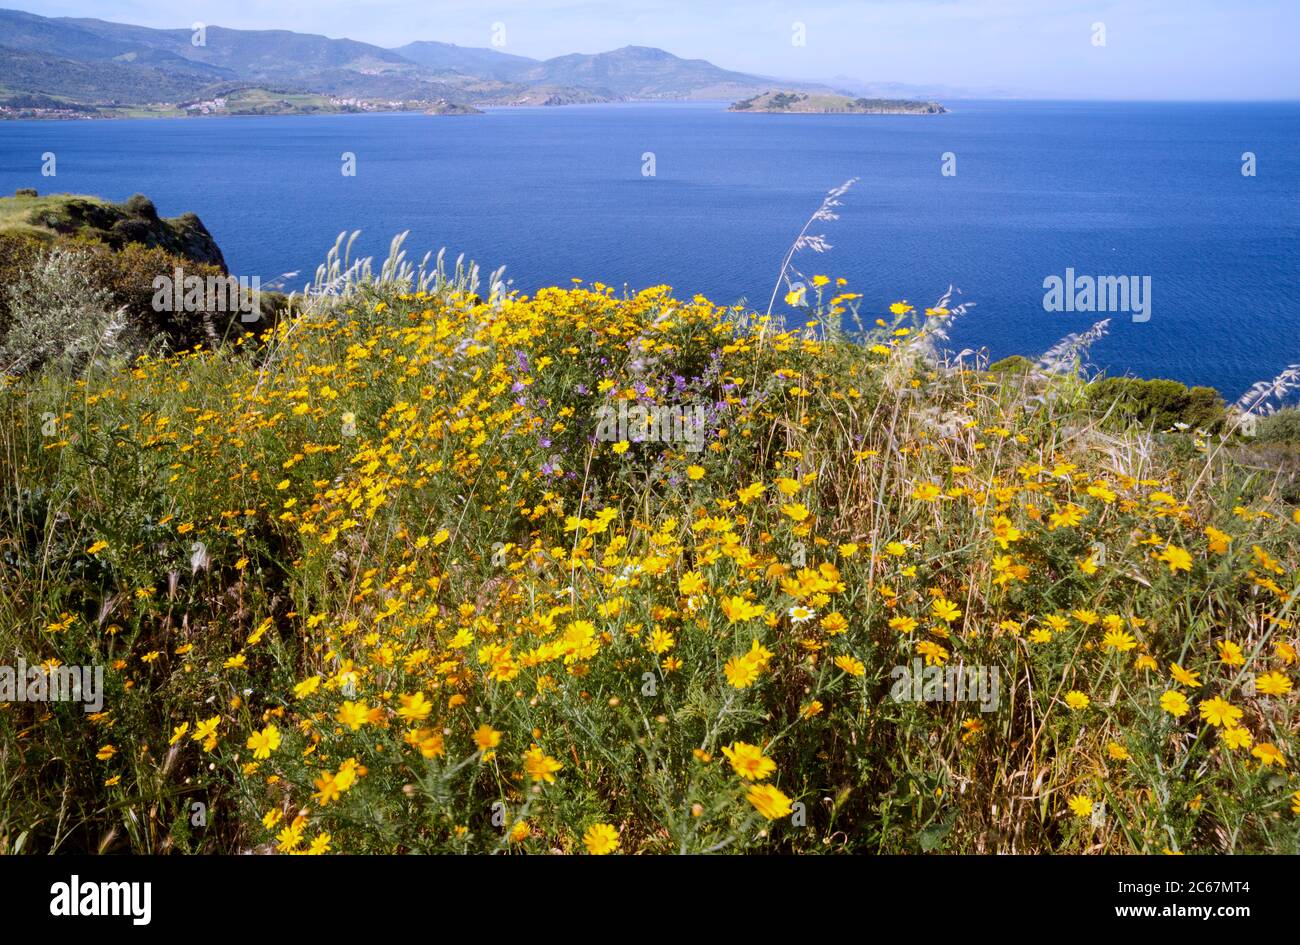 Lush spring blooming on Lesbos coast Stock Photo